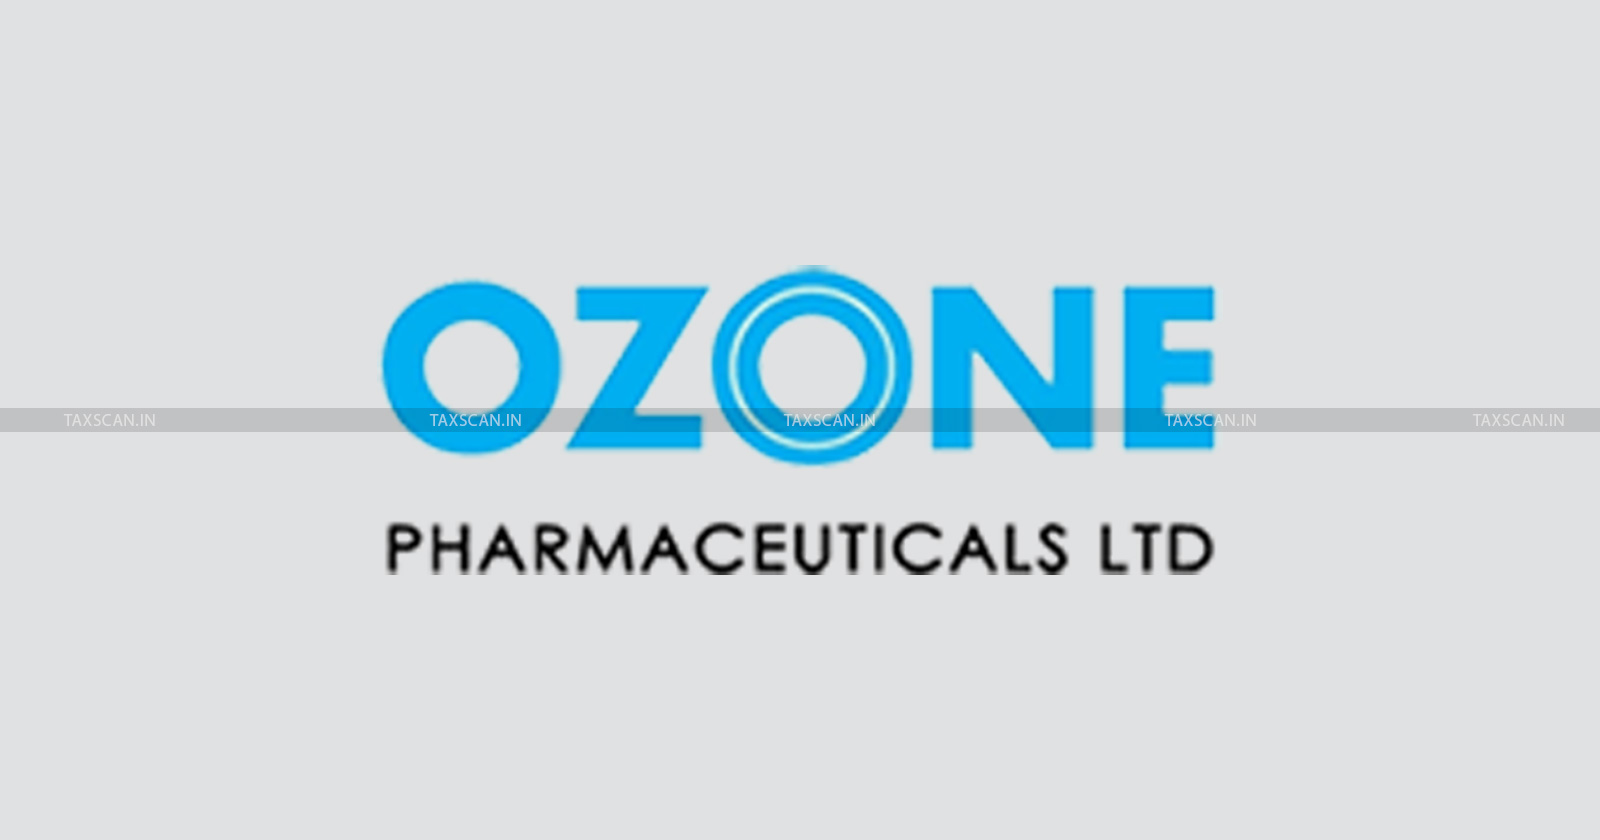 Relief - Ozone Pharmaceuticals - CESTAT - Quashes - Excise duty demand - Clearance of Medicines - ground - Absence of Actual Loss - Revenue - taxscan